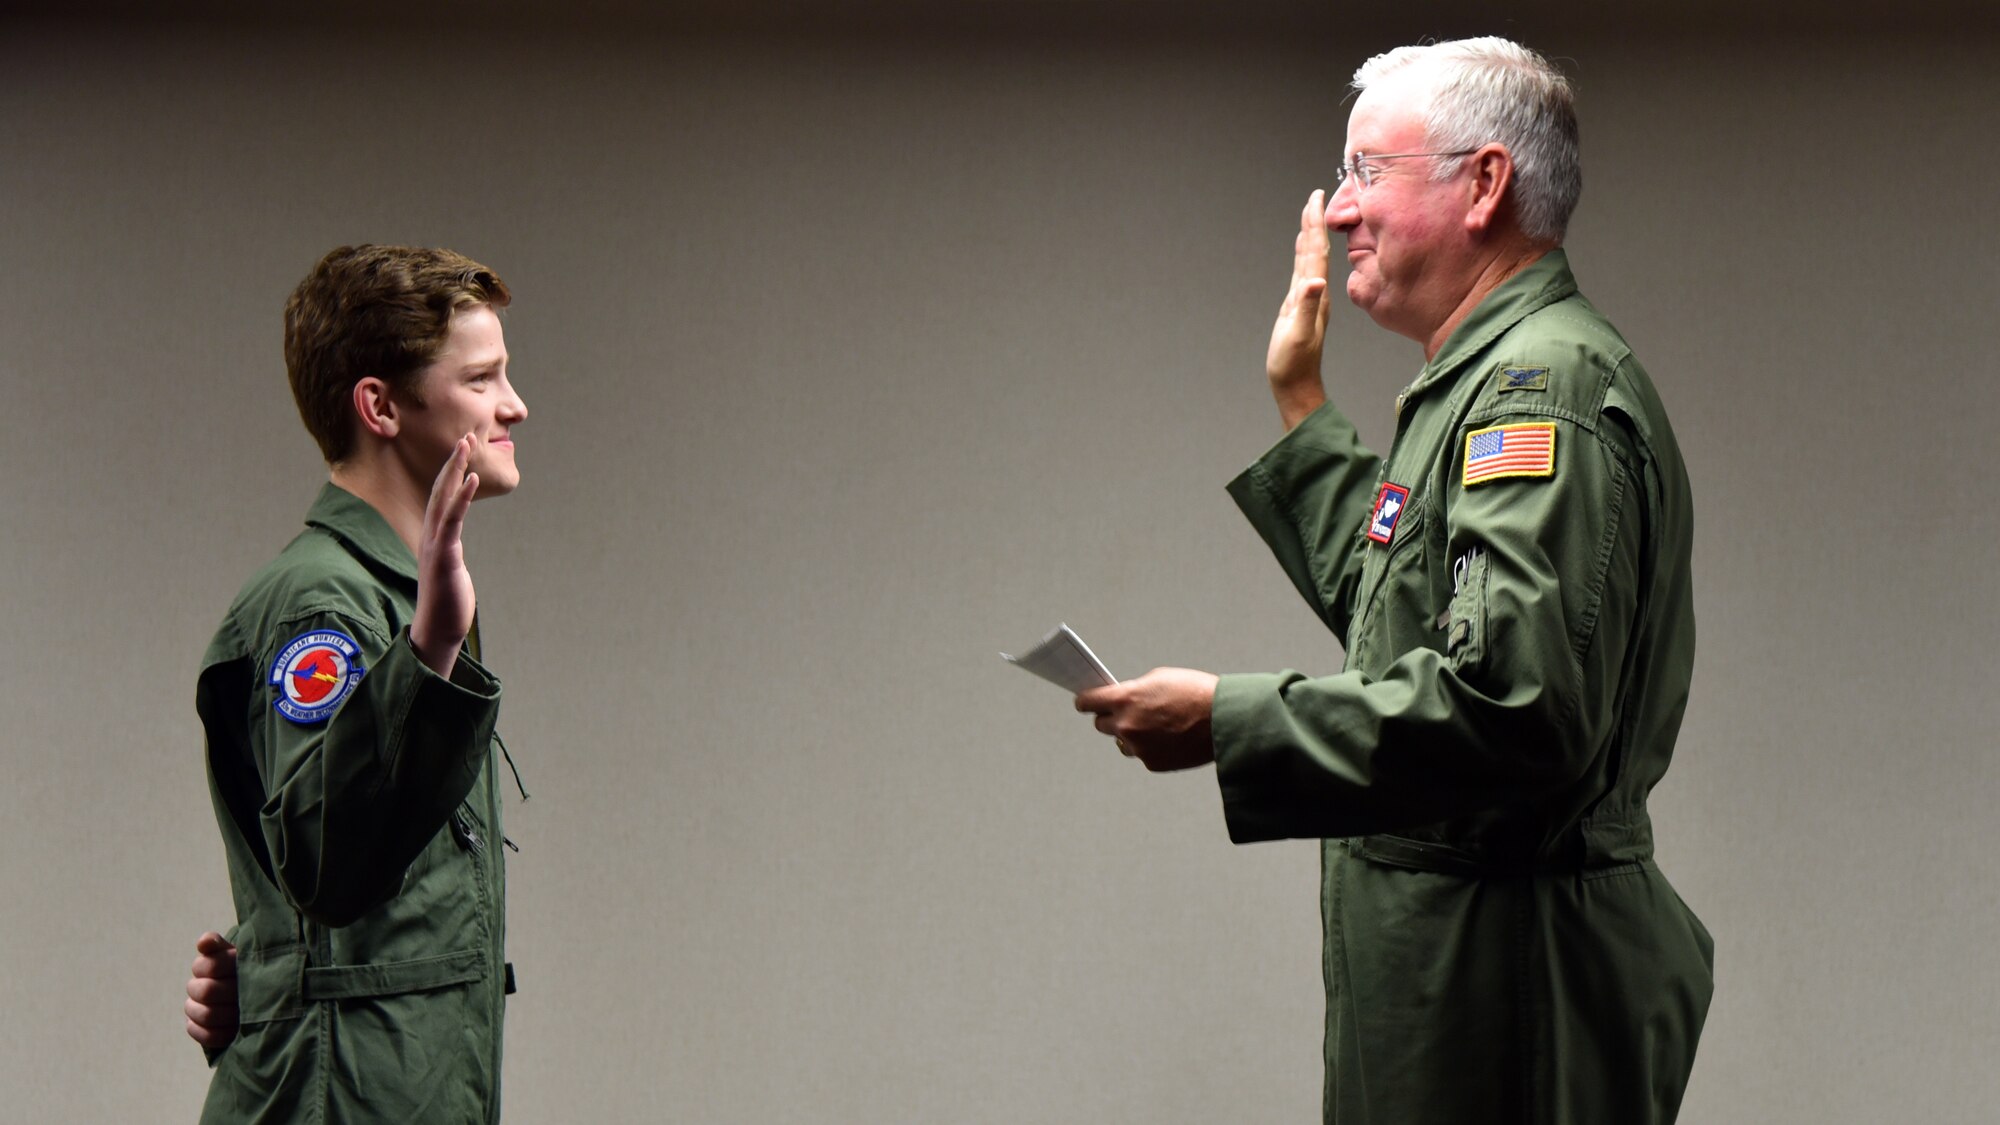 Col. Jeffrey A. Van Dootingh, 403rd Wing commander, commissions honorary 2nd Lt. Charles “Payton” Burge, of Carriere, Mississippi, during the Pilot for a Day program Dec. 19, at Keesler Air Force Base, Miss. The 403rd Wing collaborated with Make A Wish Mississippi who selects the children who will participate in the Program. (U.S. Air Force photo by Lt. Col. Marnee A.C. Losurdo)